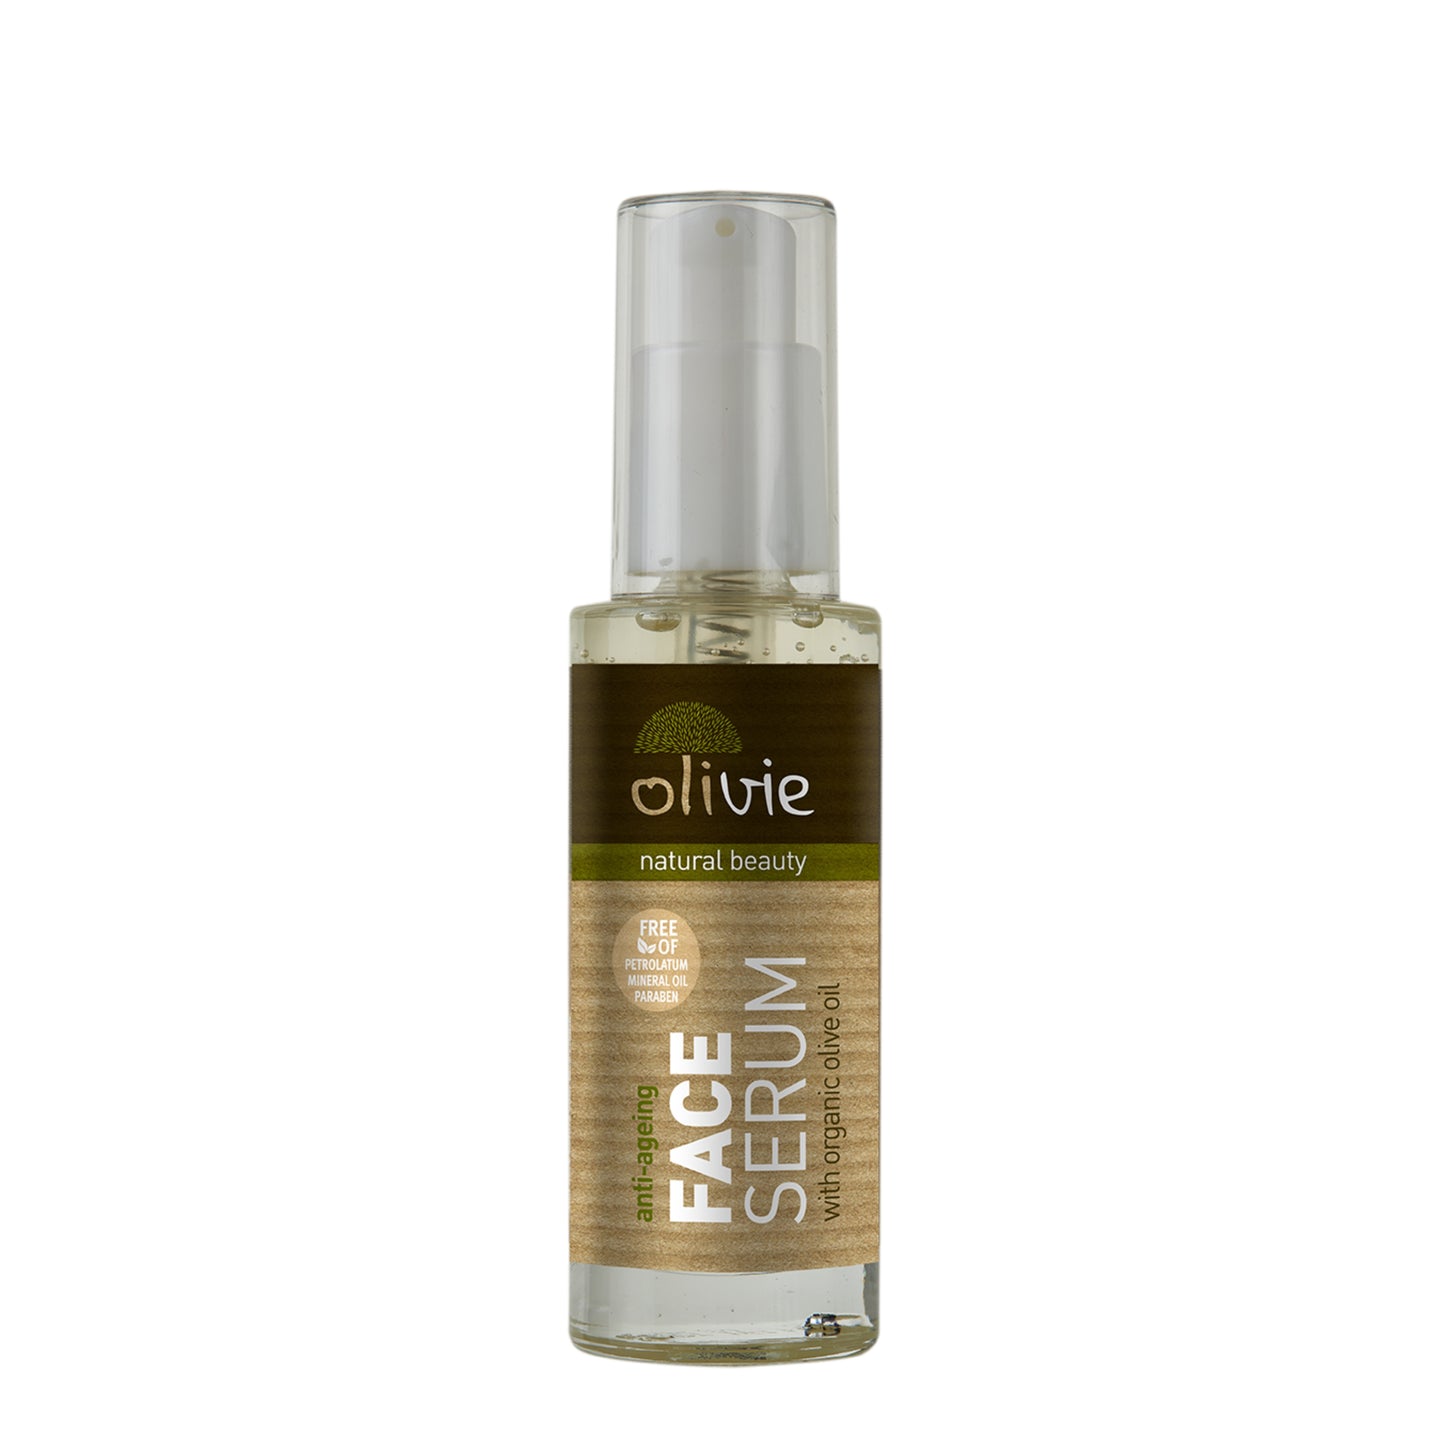 Anti-ageing face and neck serum – 30ml